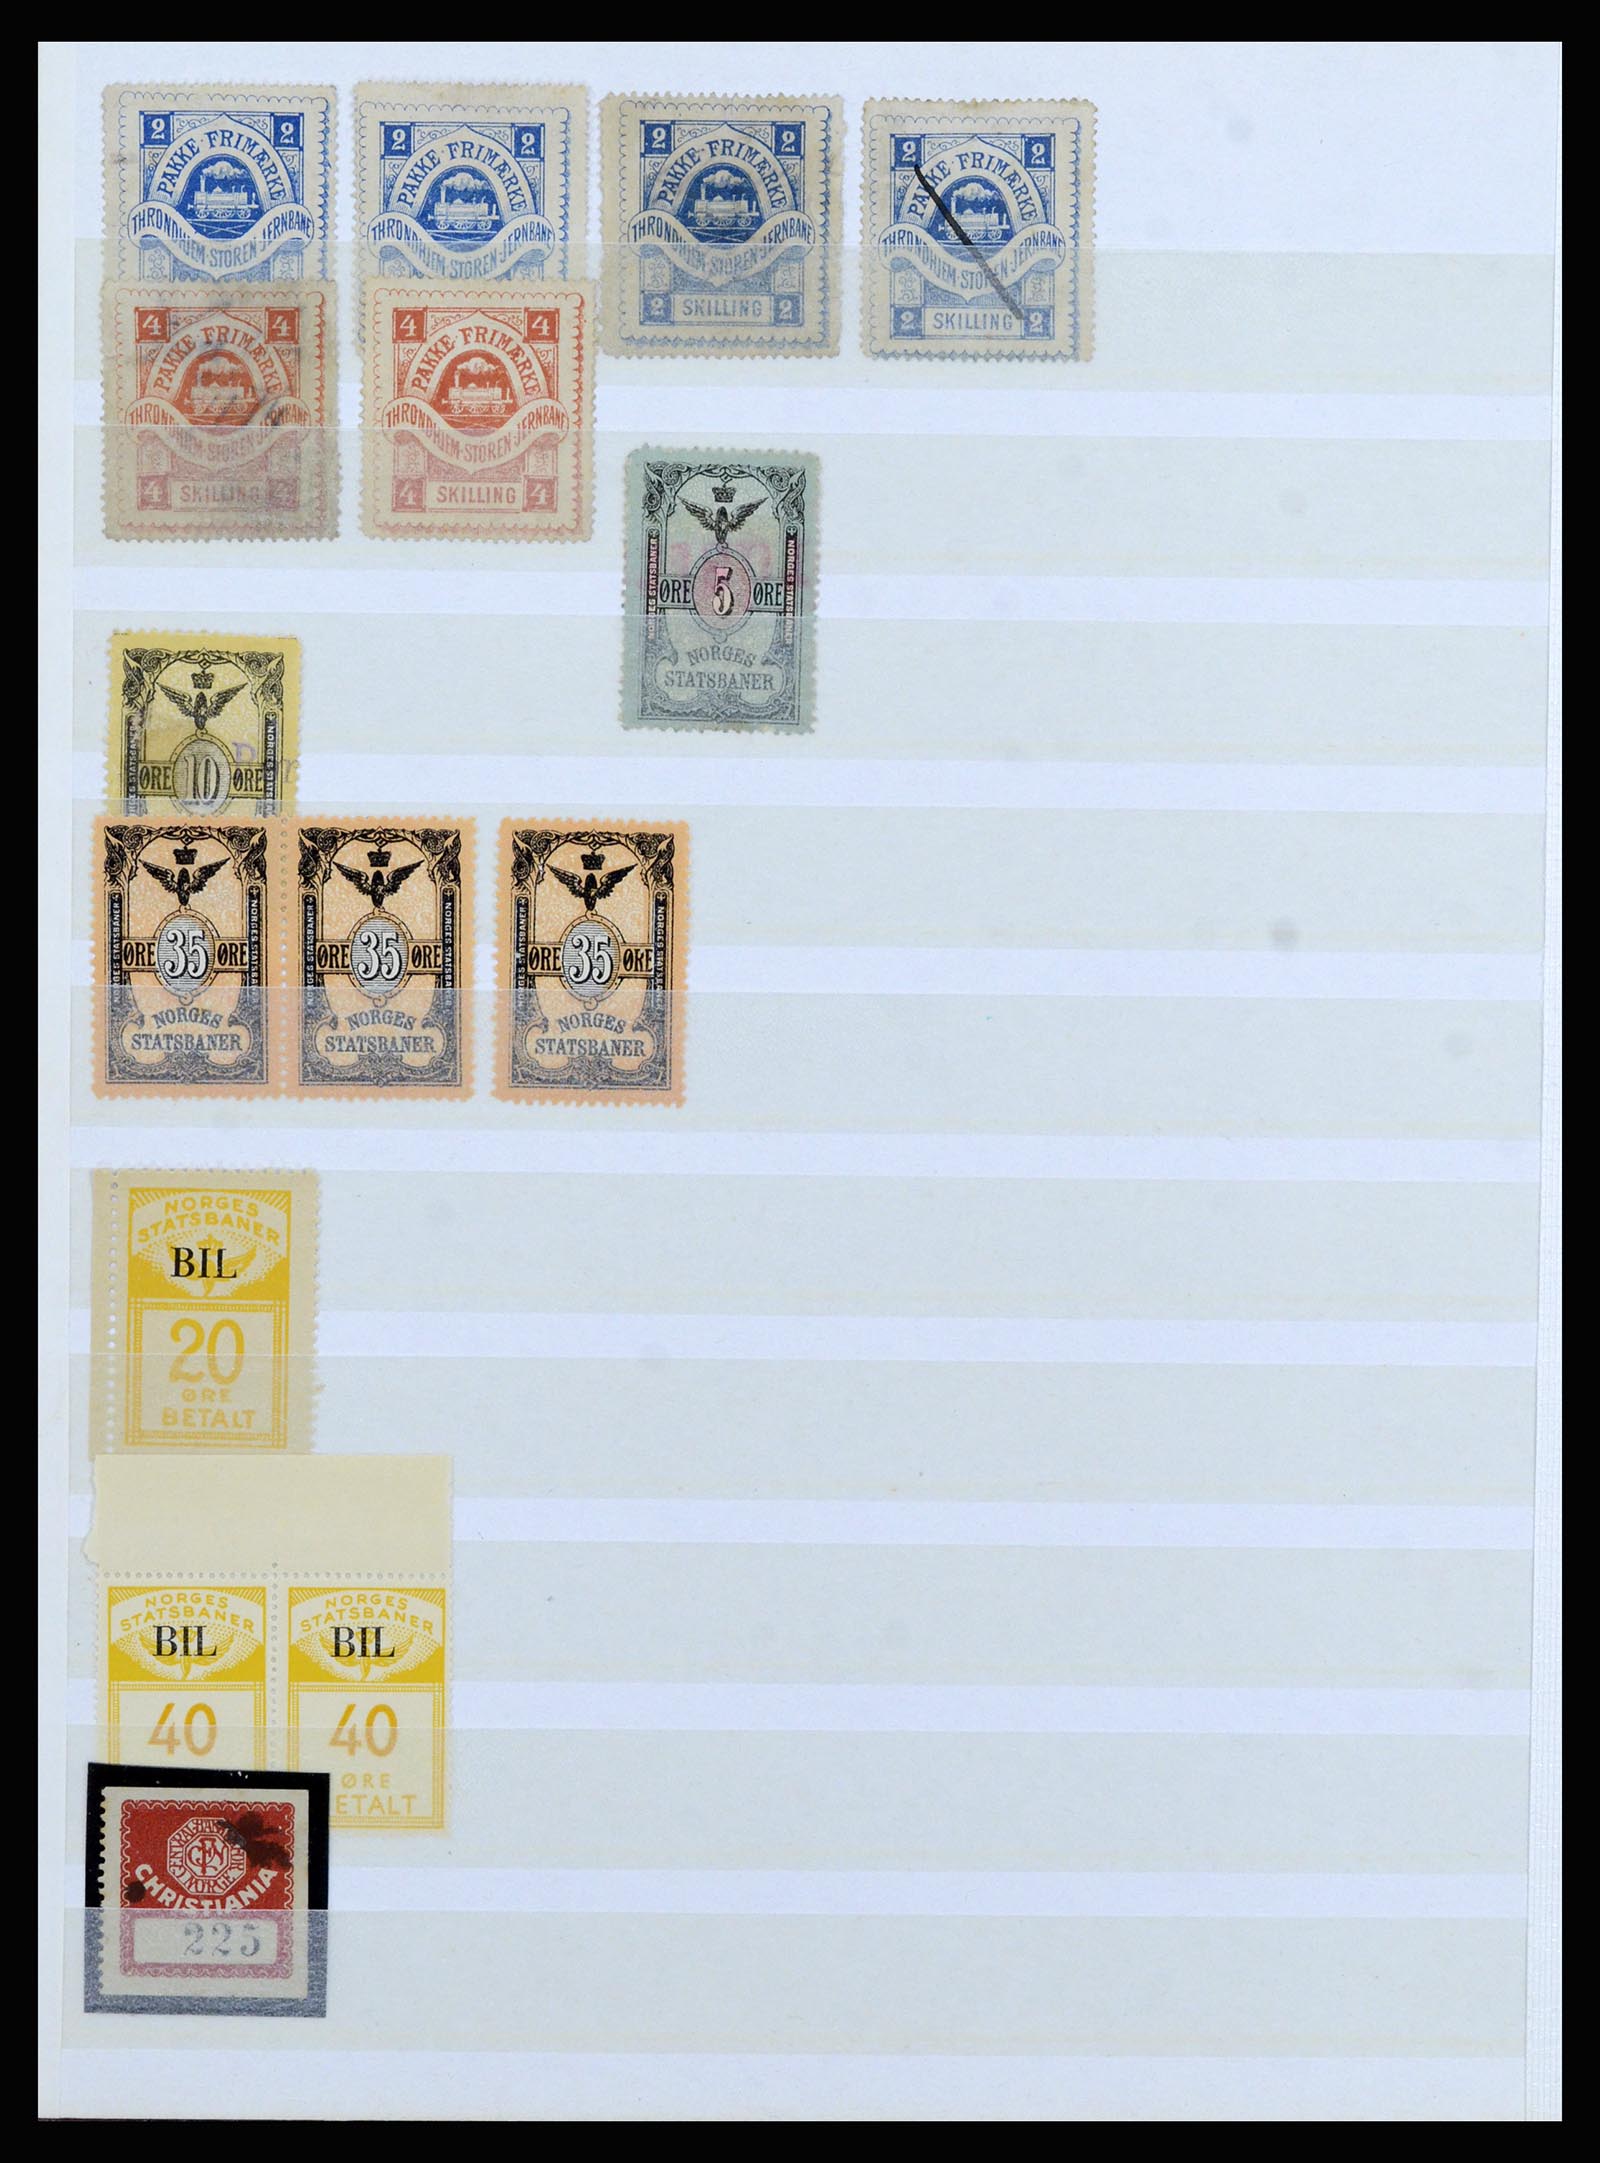 36981 049 - Stamp collection 36981 Scandinavia railroadstamps.